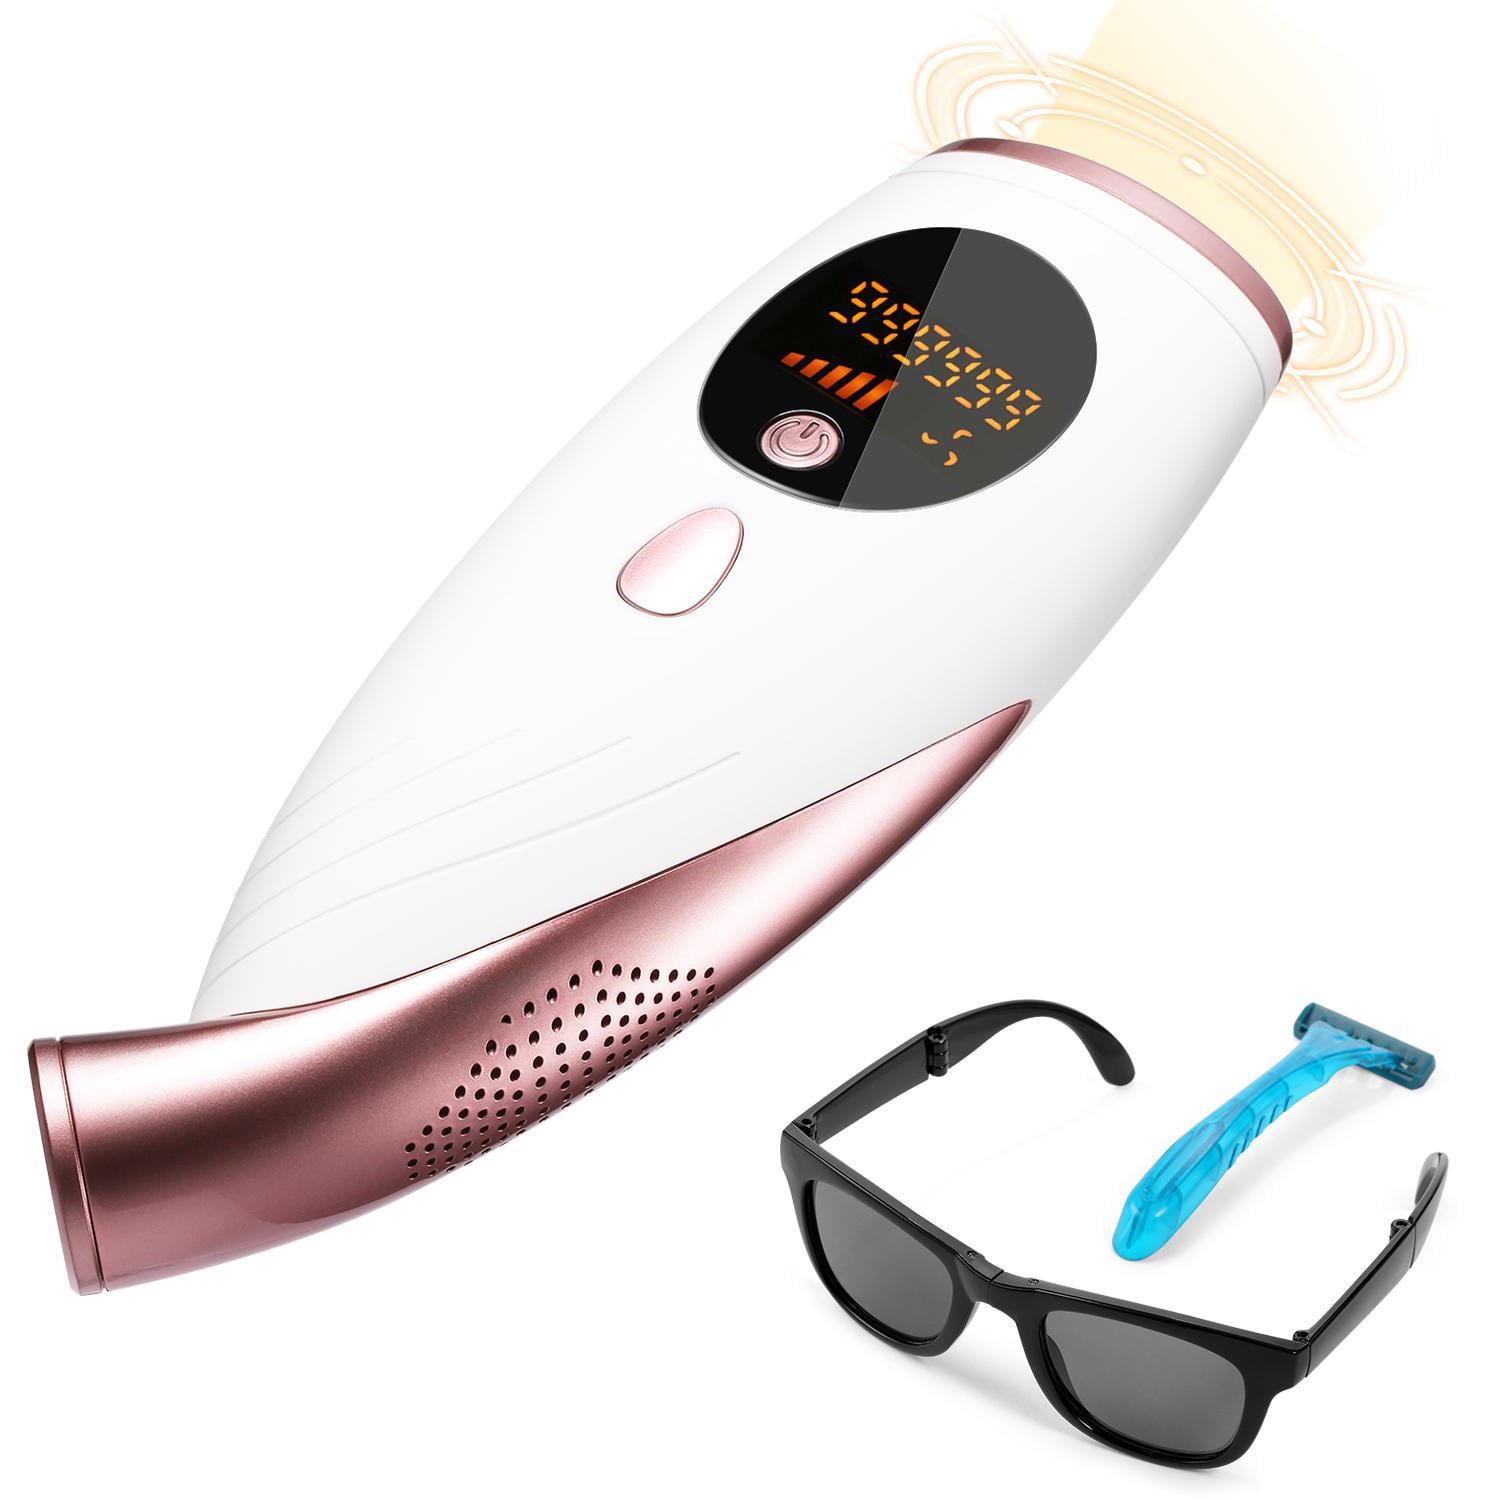 permanent hair removal trimmer